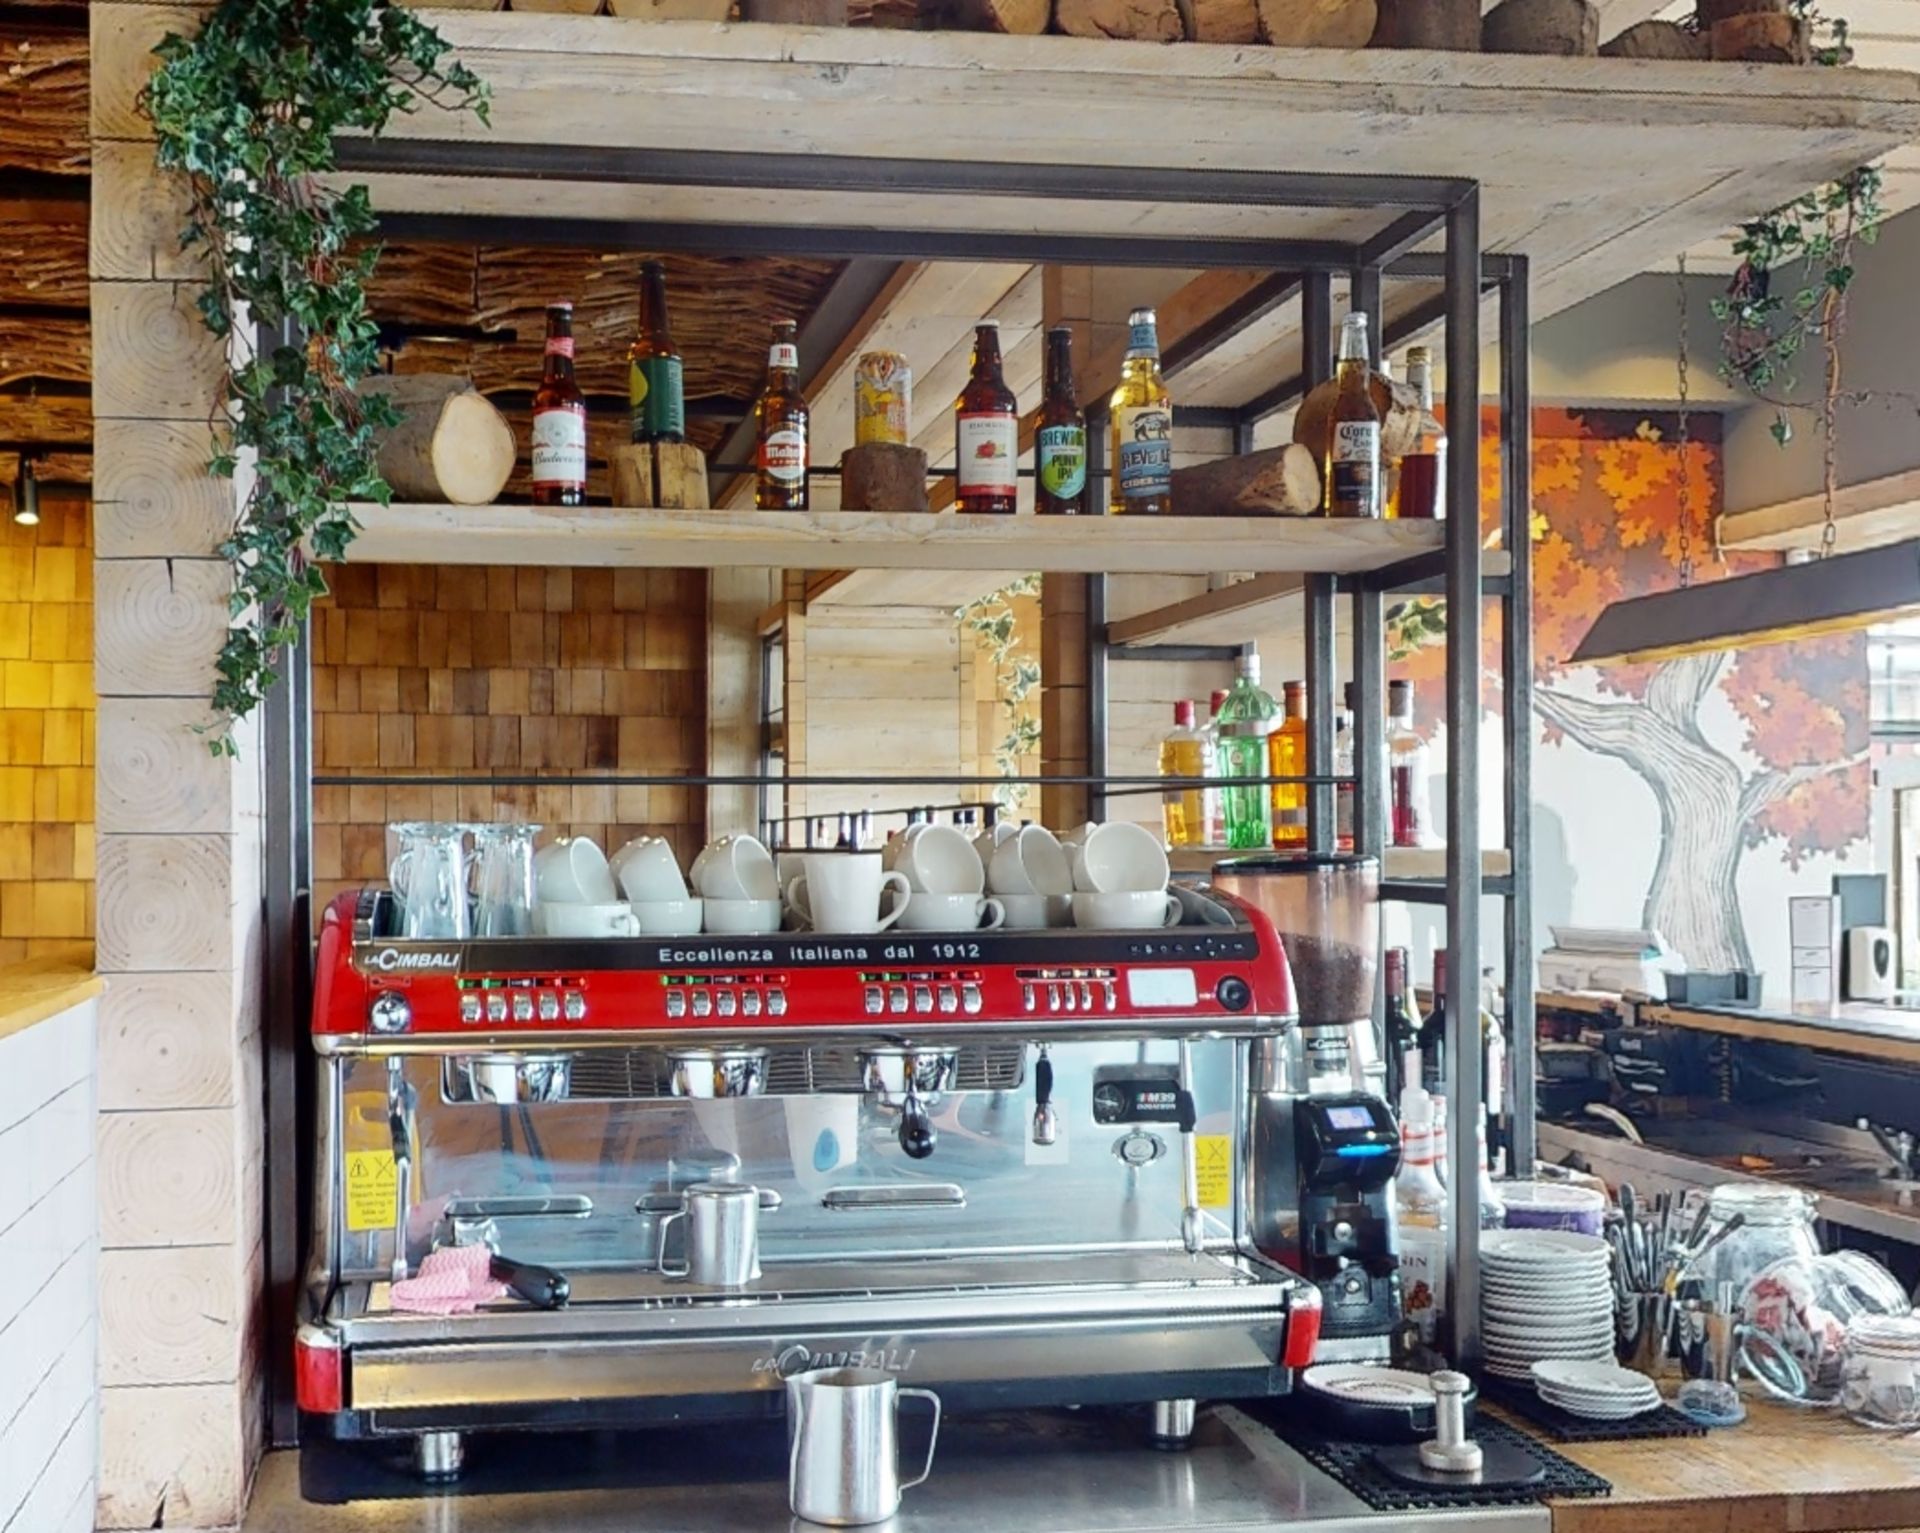 1 x Back Bar Area With an Industrial Steel and Natural Wooden Design - Image 6 of 8